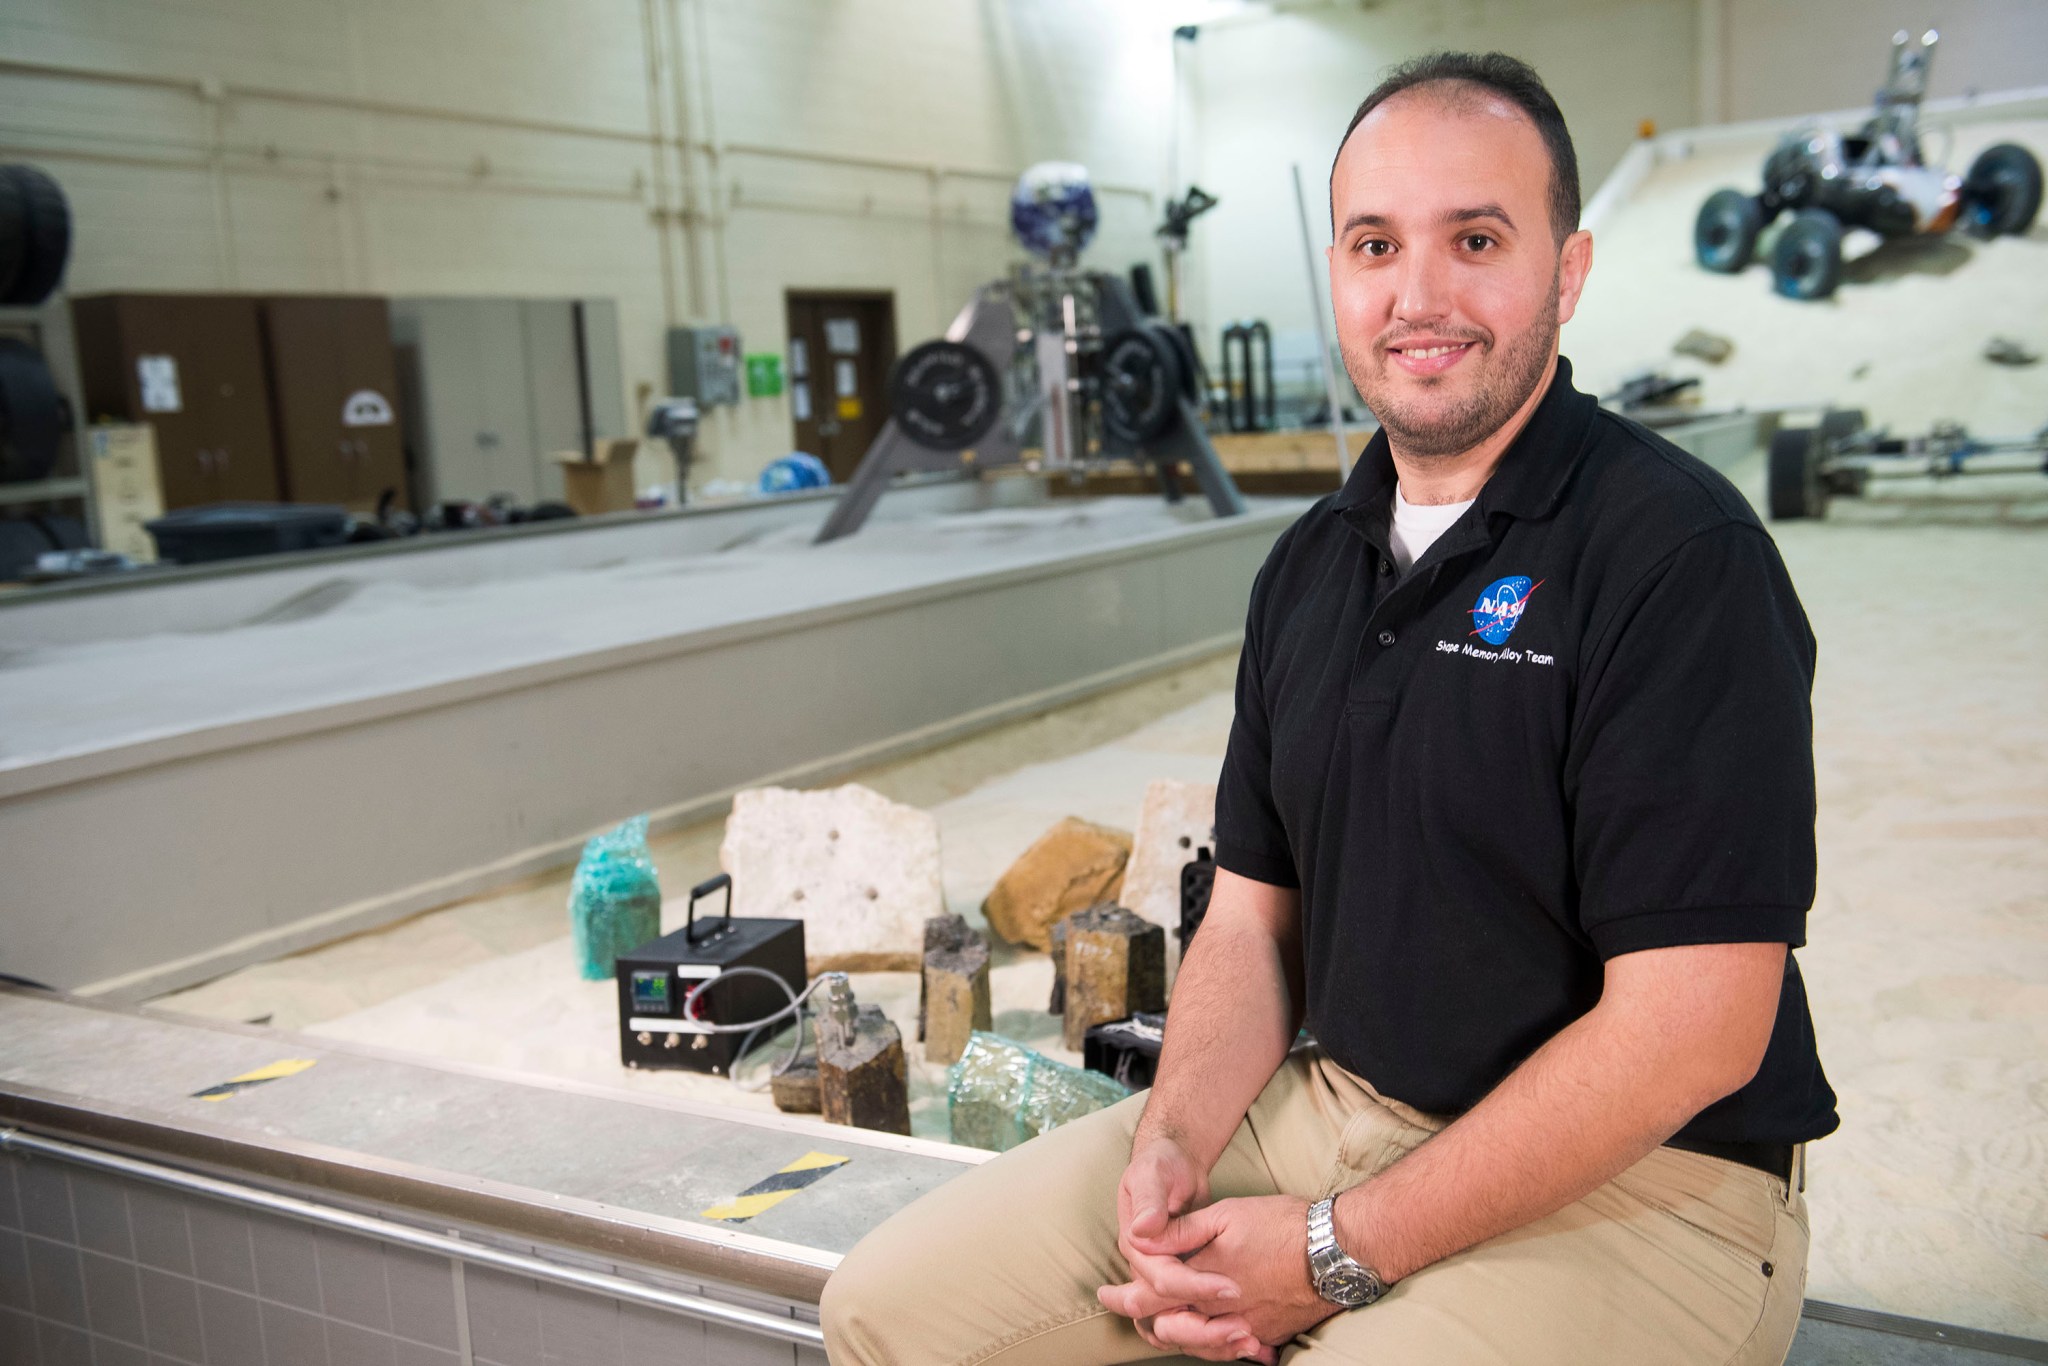  Othmane Benafan smiles for the camera. He has created a rock splitter that will help NASA explore the rocky surface of Mars 